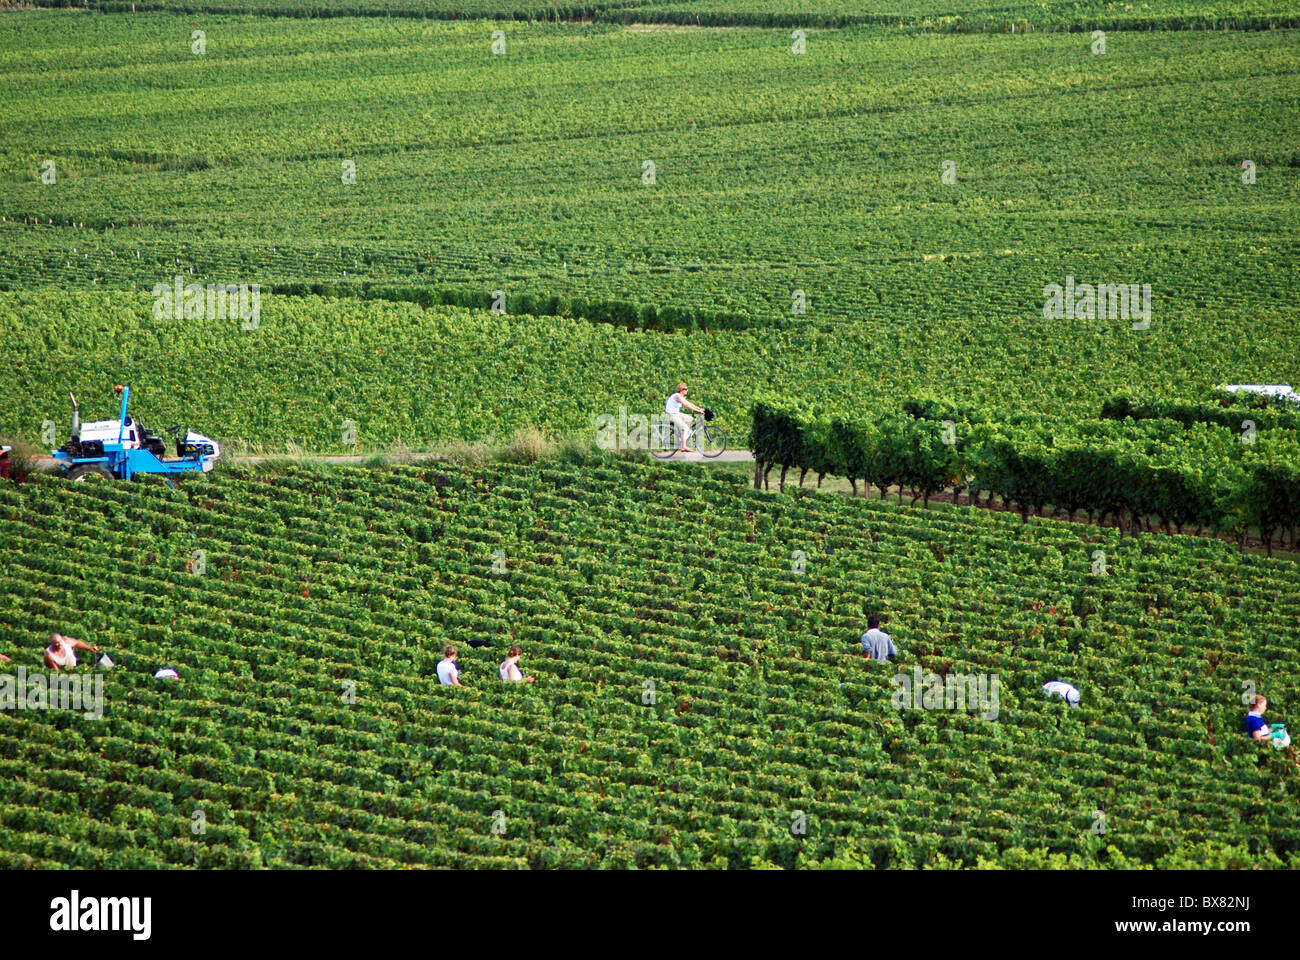 Grape pickers among the vines as a cyclist rides past, Volnay, Burgundy, France Stock Photo